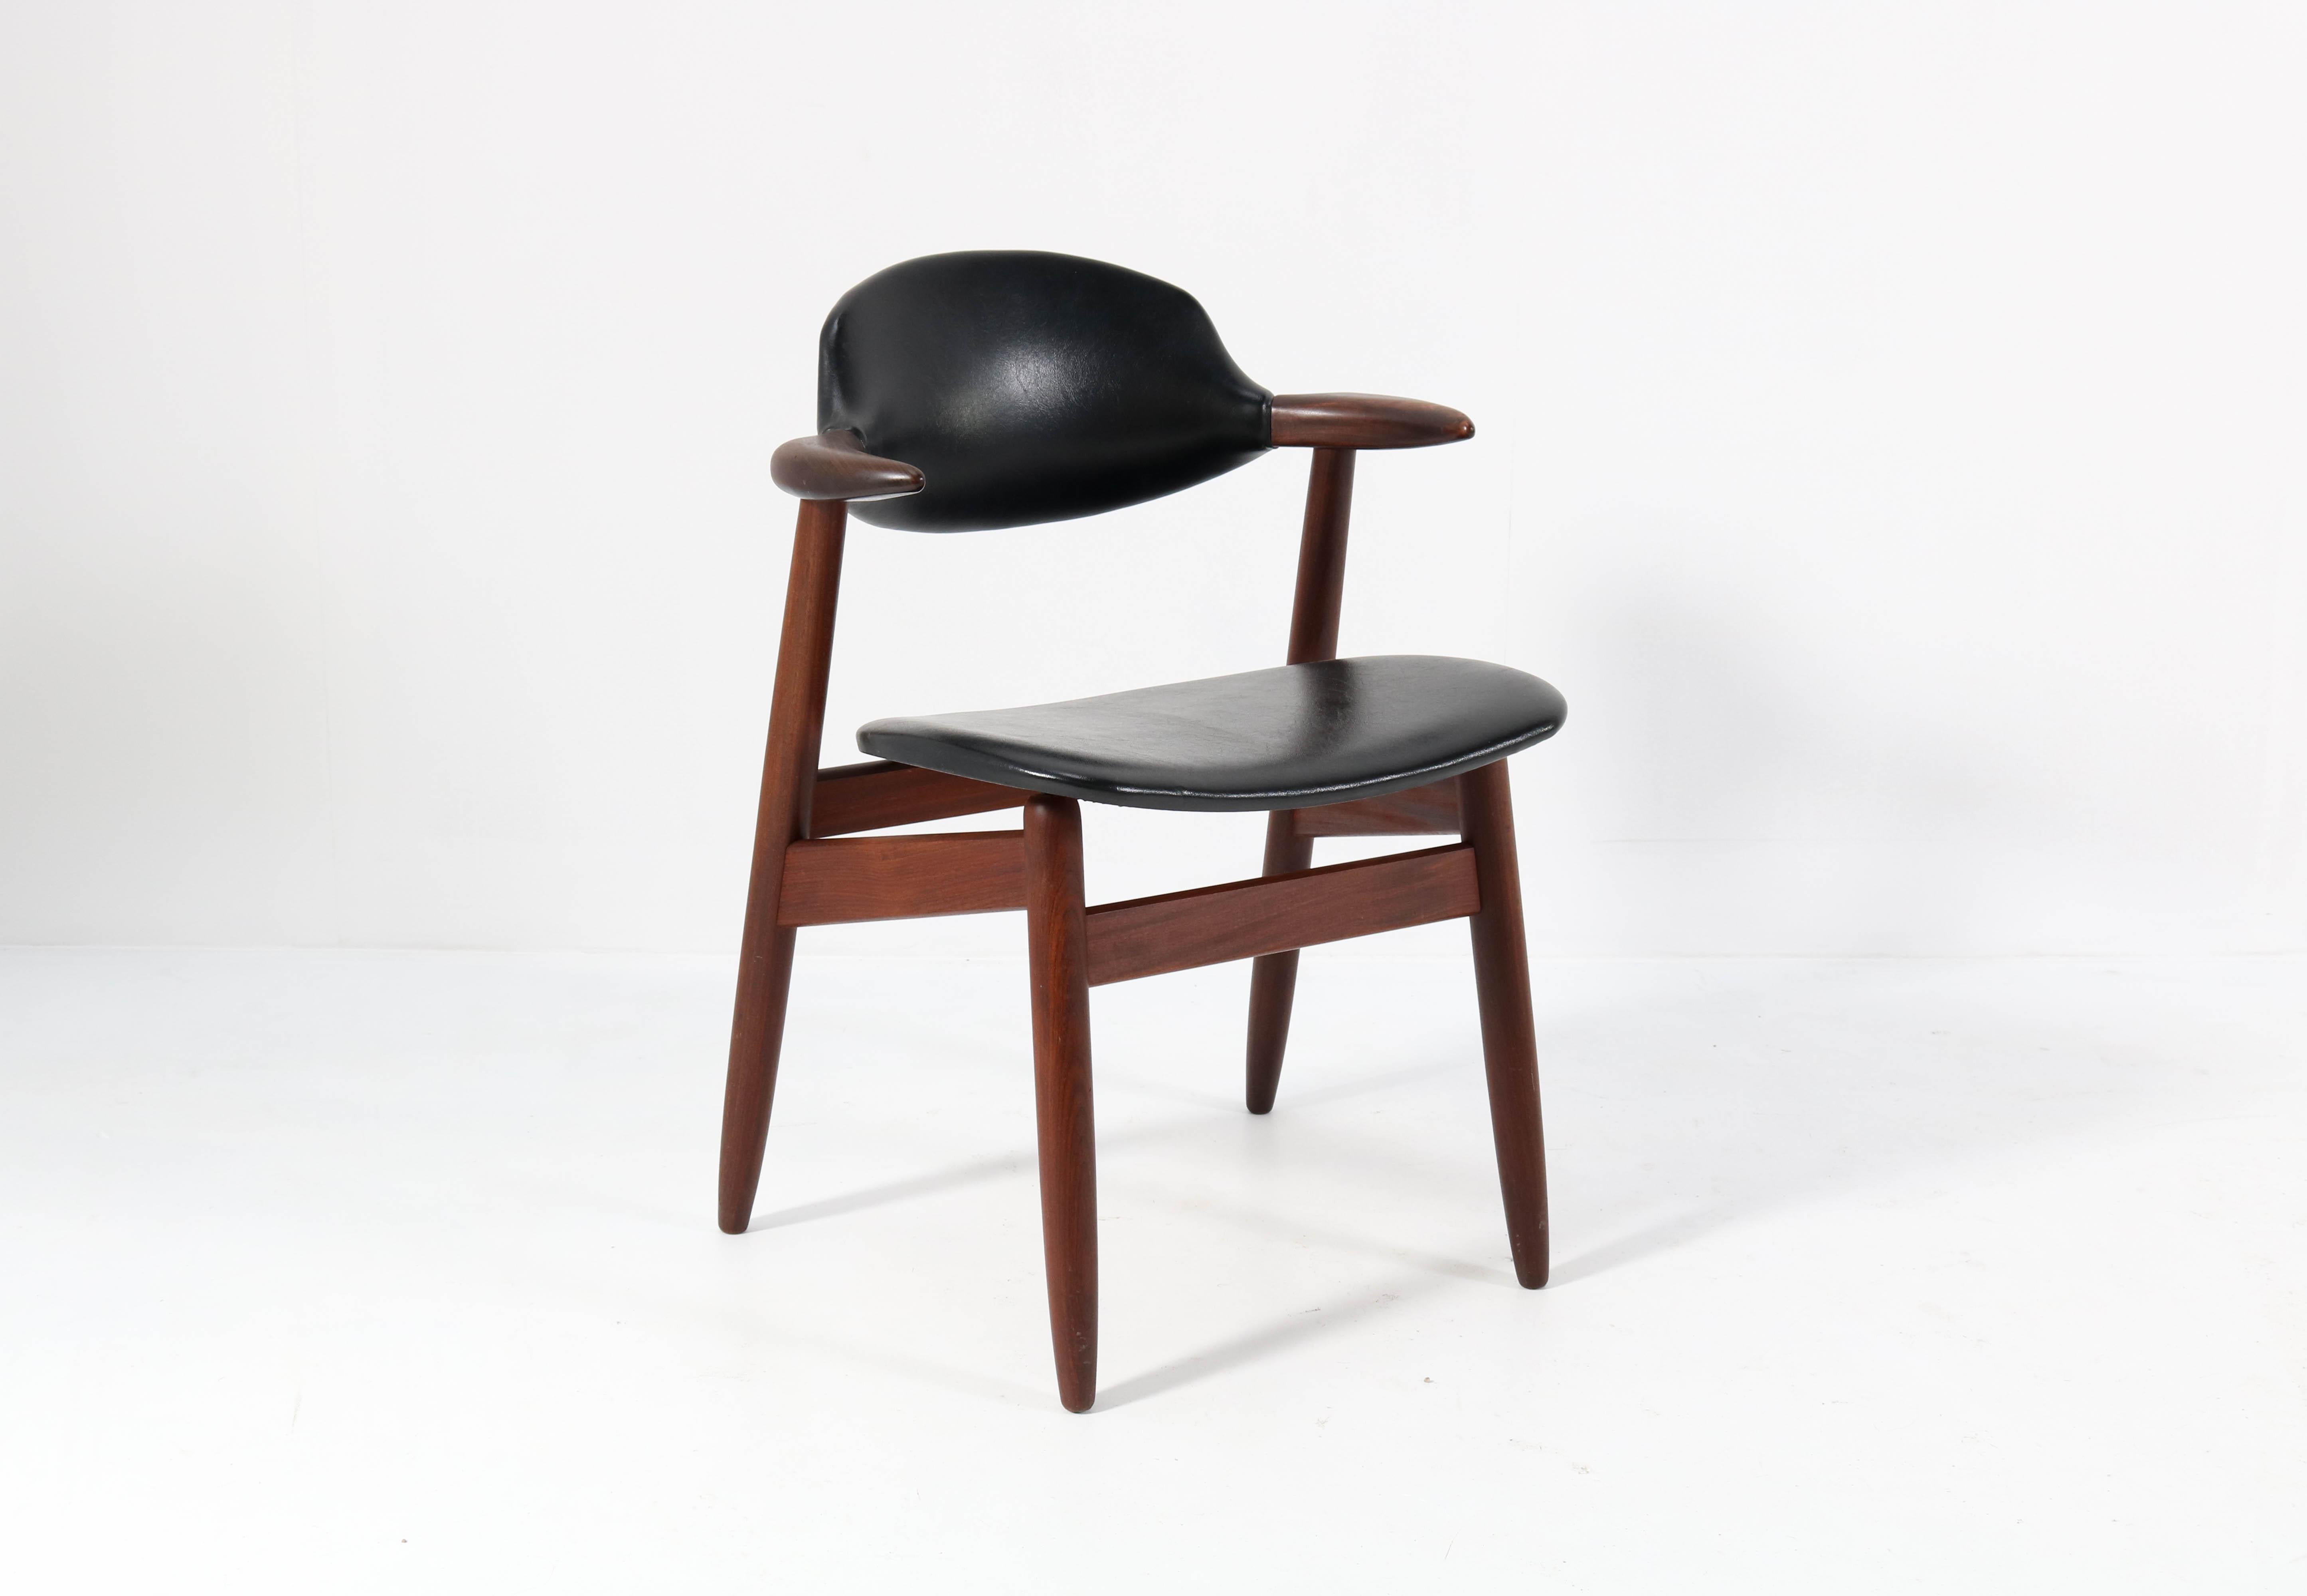 Faux Leather Two Mid-Century Modern Teak Cowhorn Chairs by Tijsseling for Hulmefa, 1960s For Sale